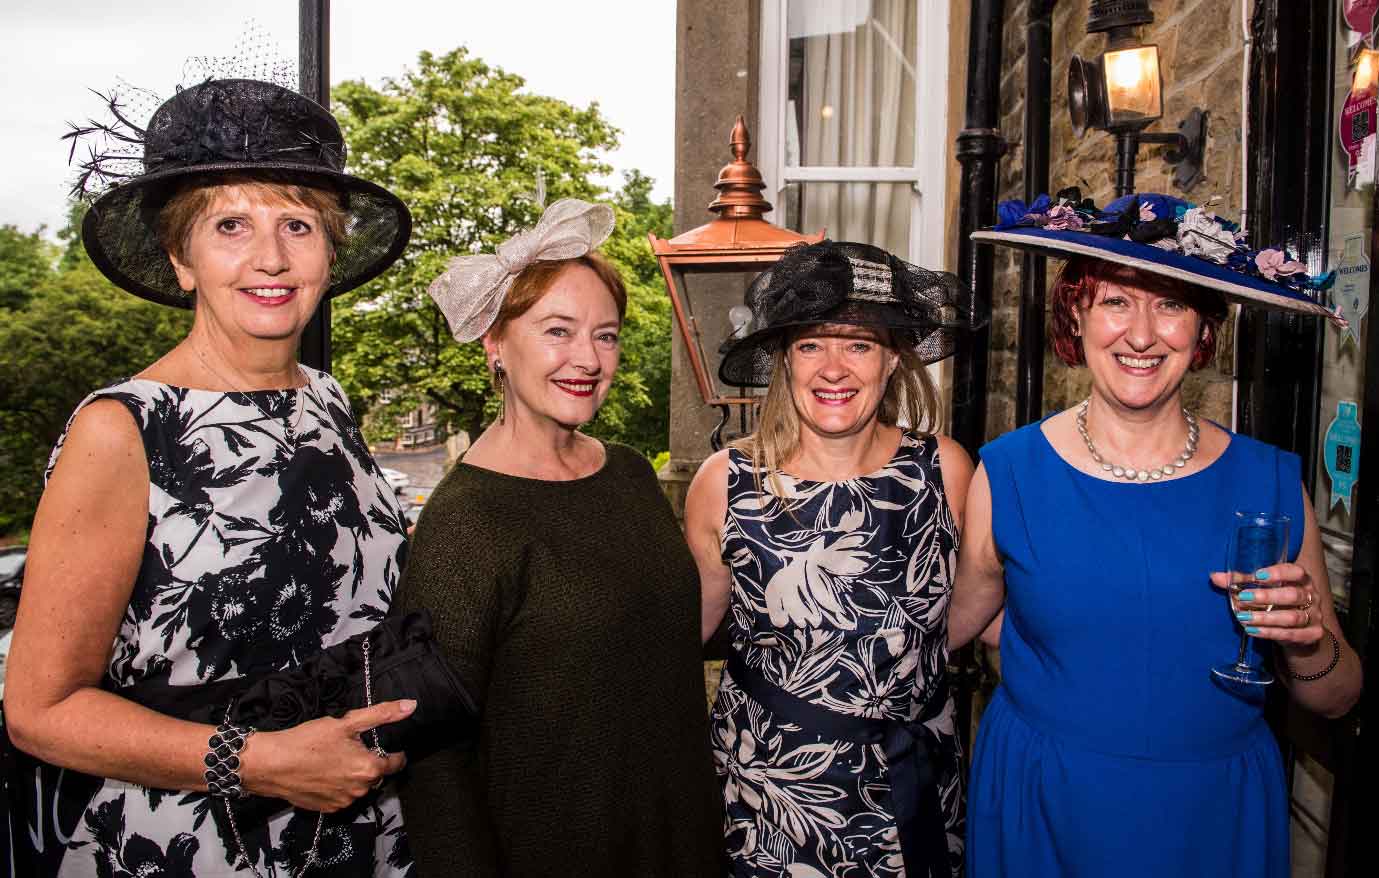 Supporting Older People - Ascot Ladies Day